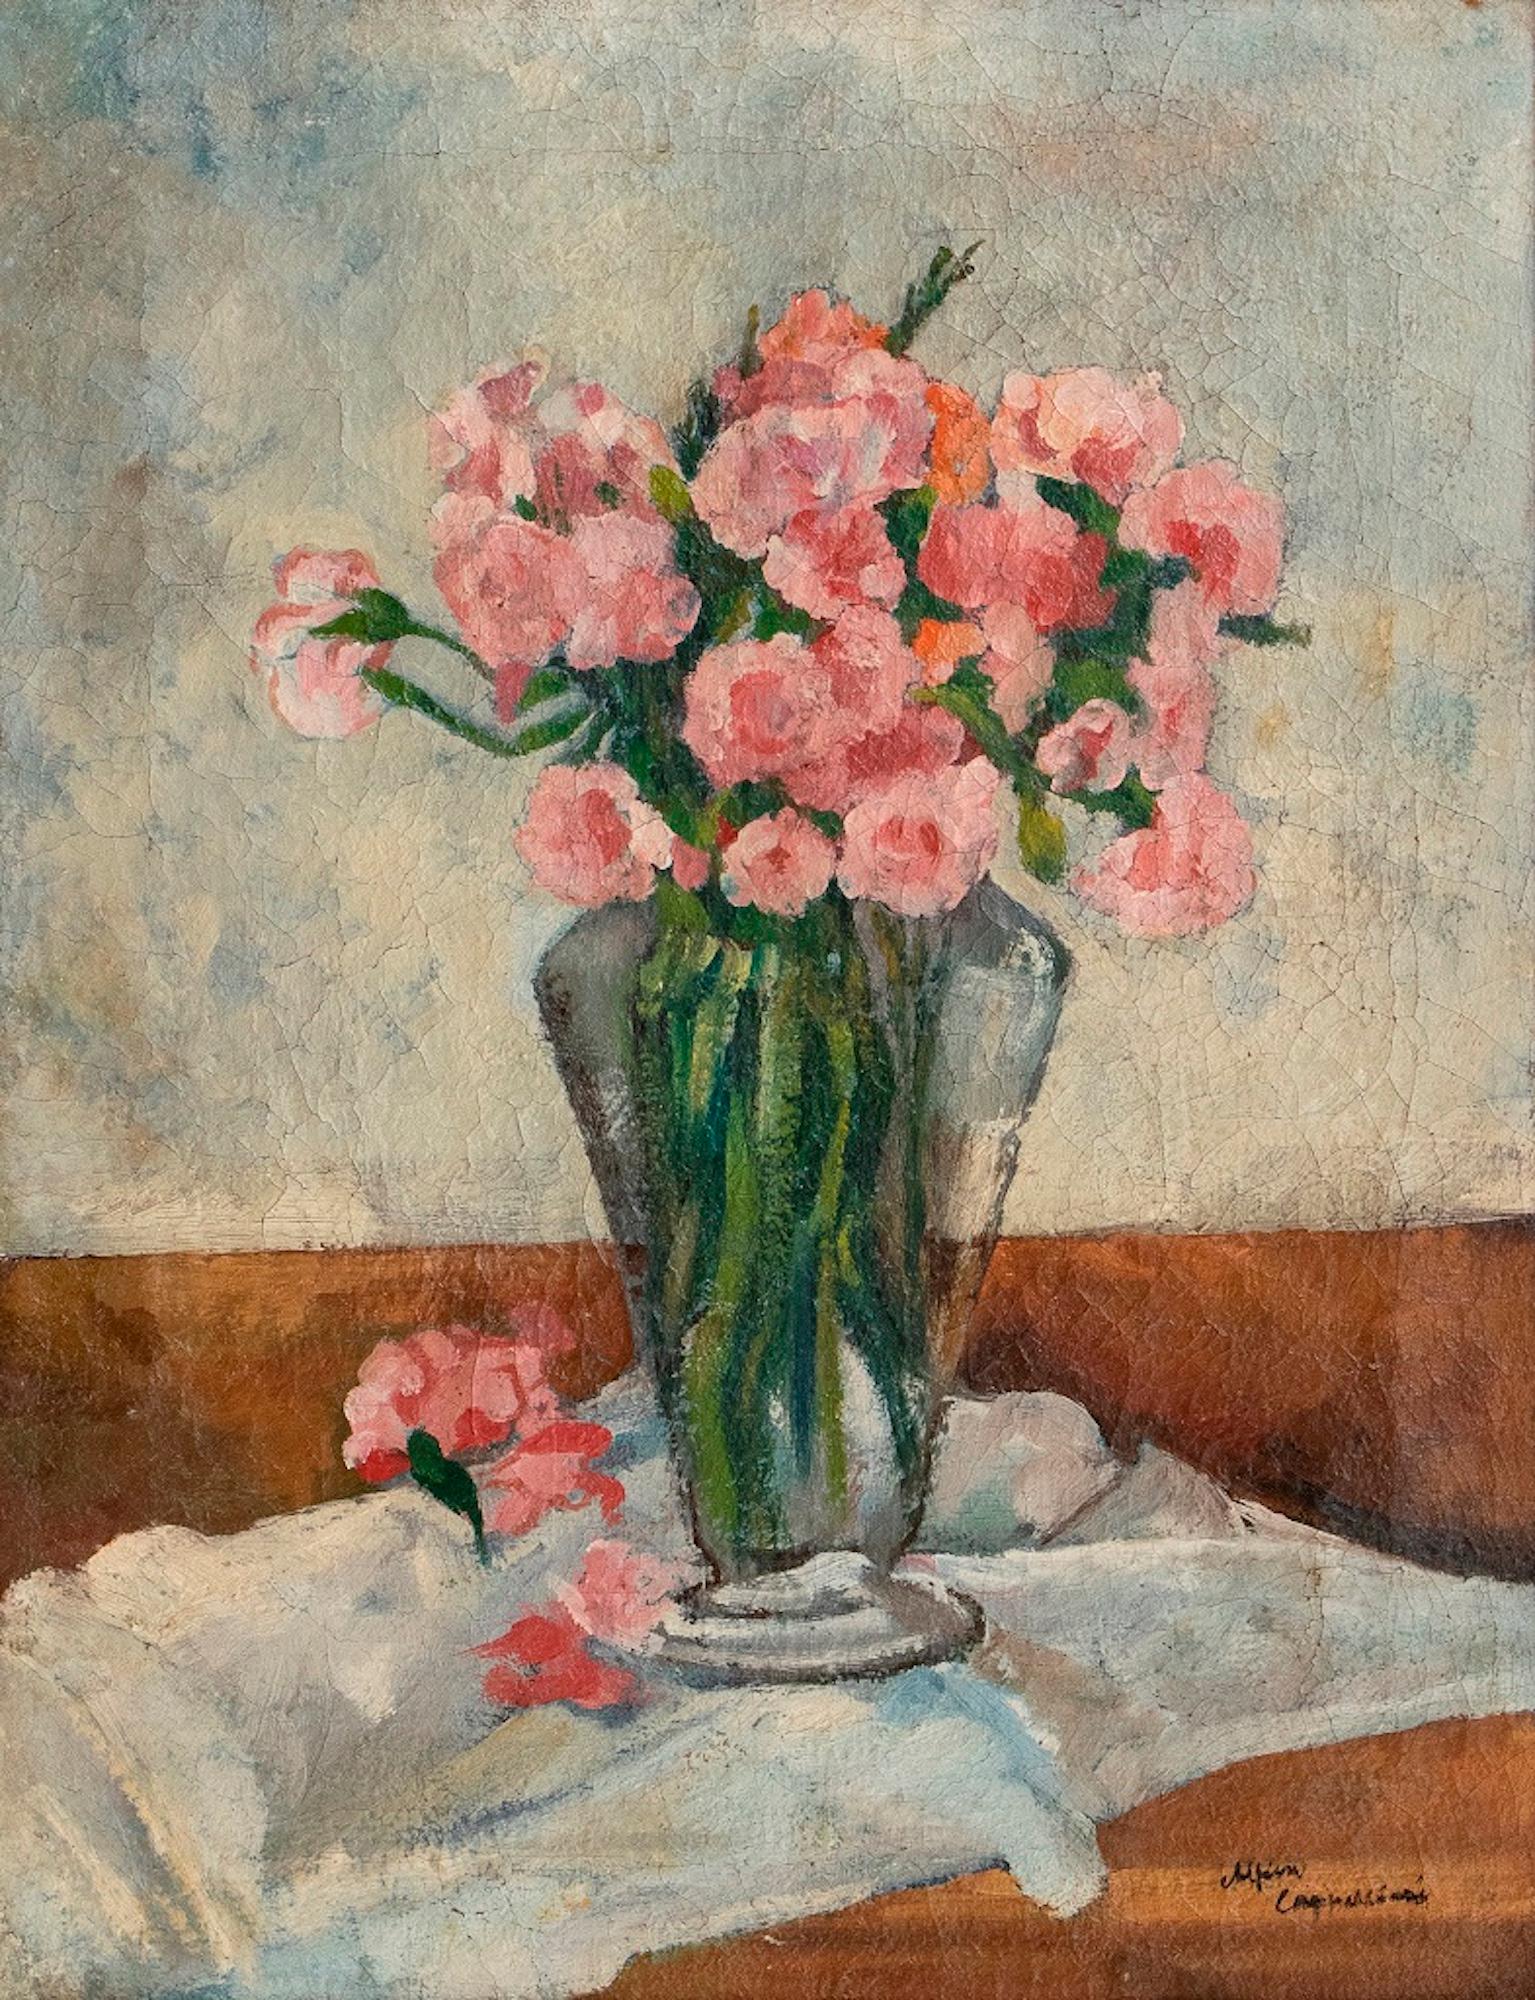 Vase with Flowers - Oil on Canvas by A. Cappellini - Mid 1900